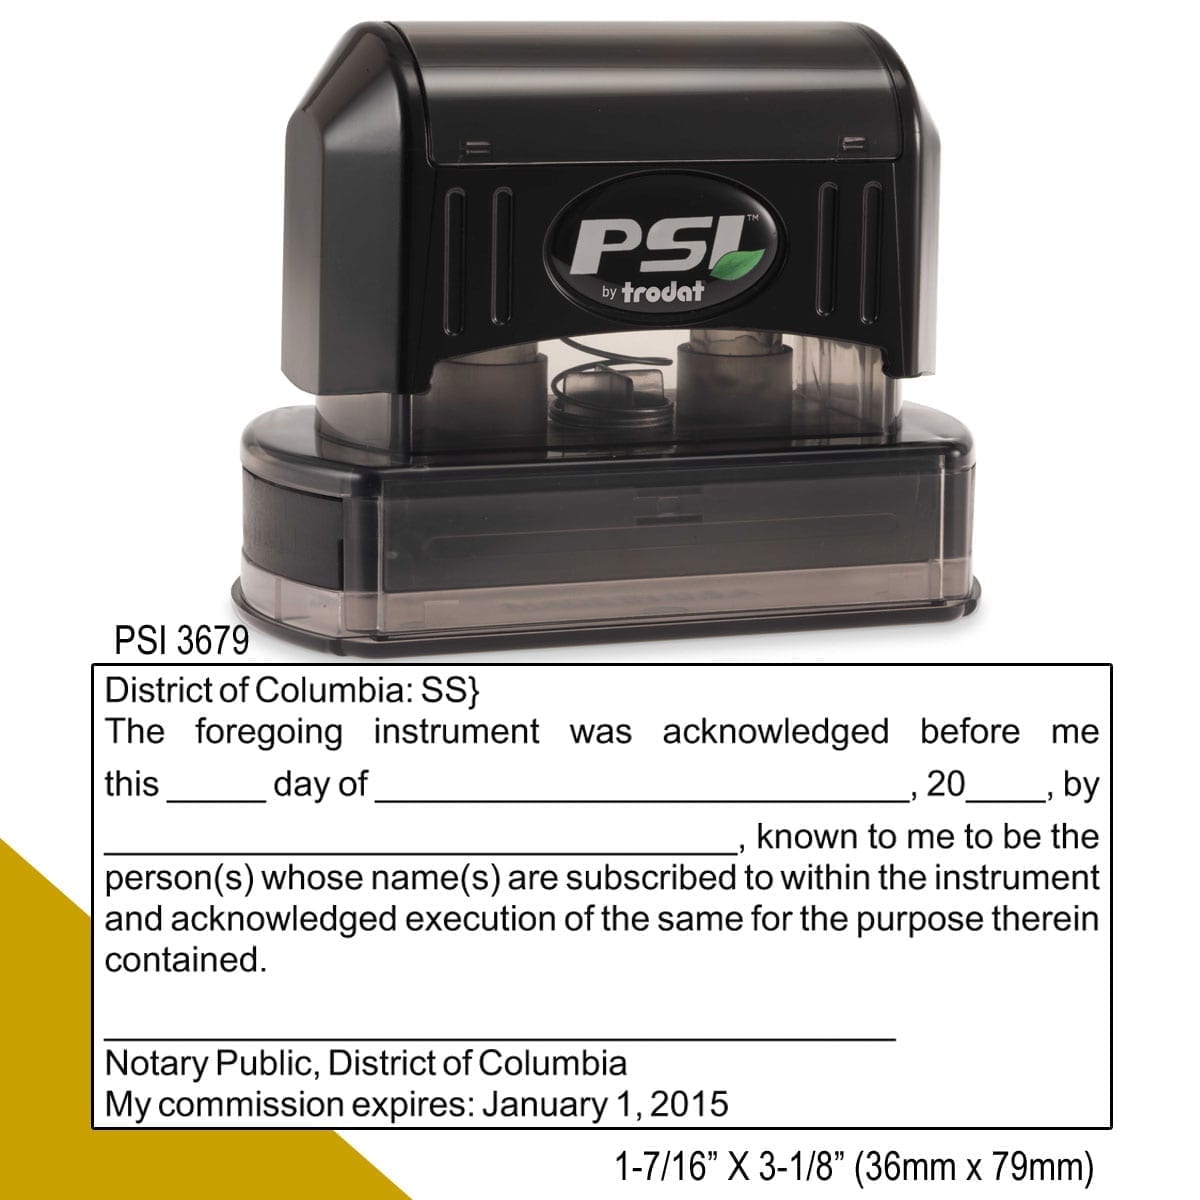 District of Columbia Notary Acknowledgment Stamp